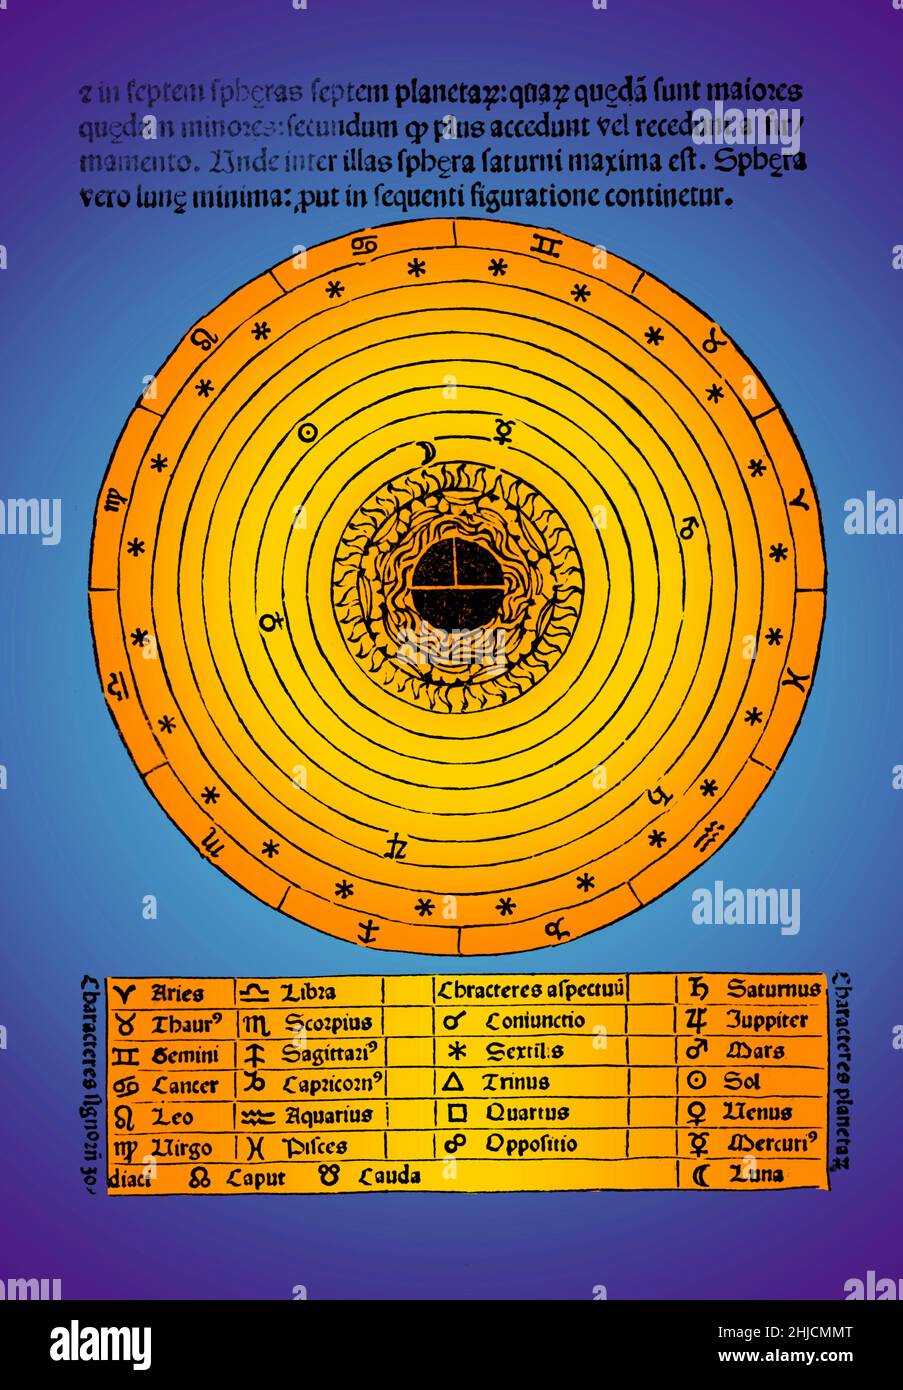 Colorized schematic representation of the cosmos from 'De sphaera mundi,' a medieval introduction to the basic elements of astronomy written by Johannes de Sacrobosco, circa 1230. Seven concentric circles represent the orbits of the moon, the planets and the sun. Stock Photo